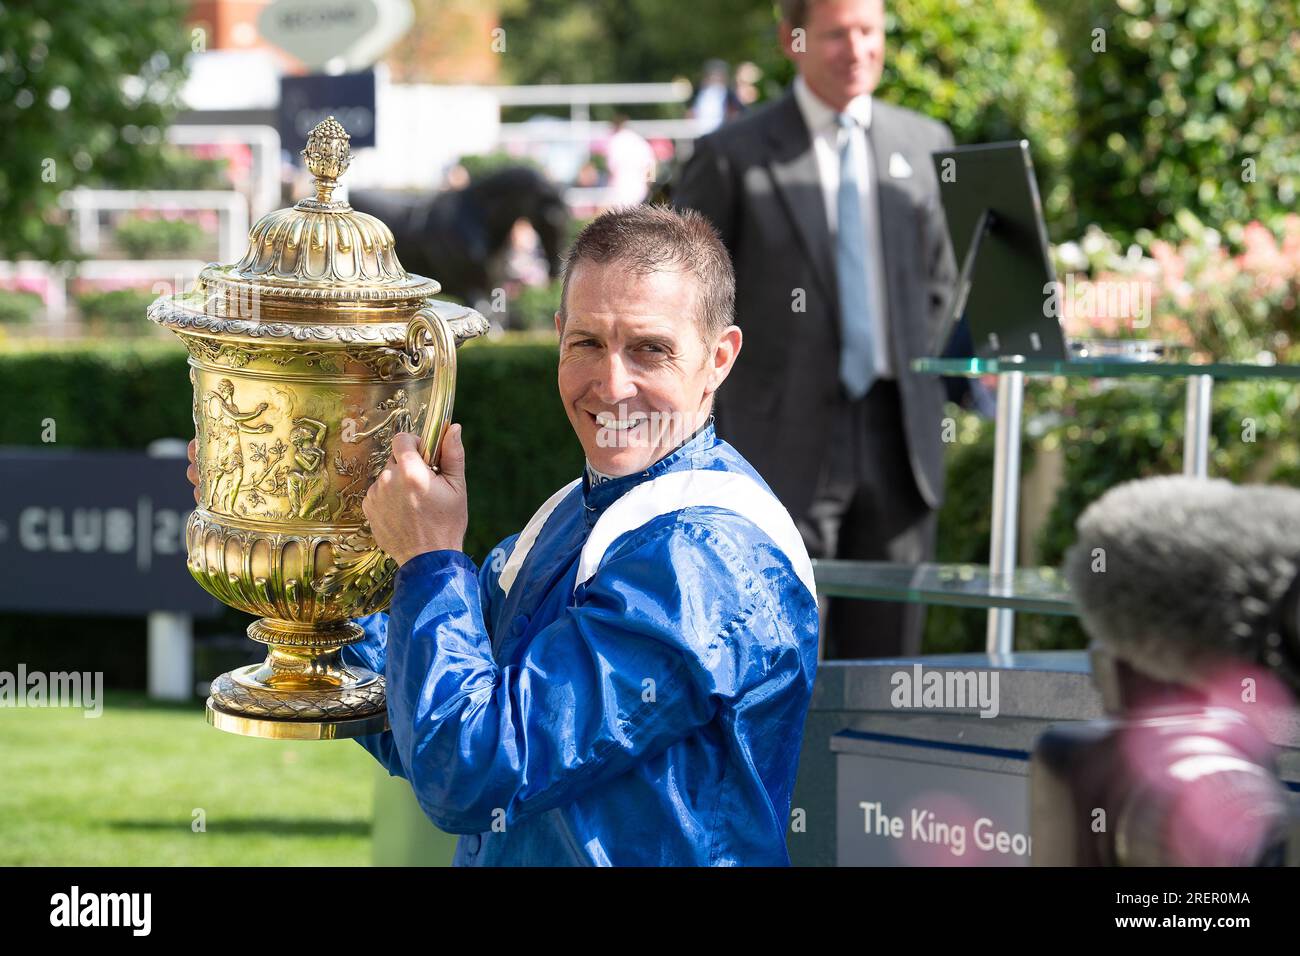 Ascot, Berkshire, UK. 29th July, 2023. Jim Crowley holds up the trophy after winning the King George race. Princess Anne, The Princess Royal made the presentation to owners, trainer and jockey for the King George VI and Queen Elizabeth QIPCO Stakes. The race was won by horse Hukum ridden by jockey Jim Crowley. Sheikha Hissa, and her husband Sheikh Maktoum bin Majid Al Maktoum received the trophy from the Princess Royal. Owners and Breeder Shadwell Estate Company Ltd. Trainer Owen Burrows, Lambourn. Credit: Maureen McLean/Alamy Live News Stock Photo